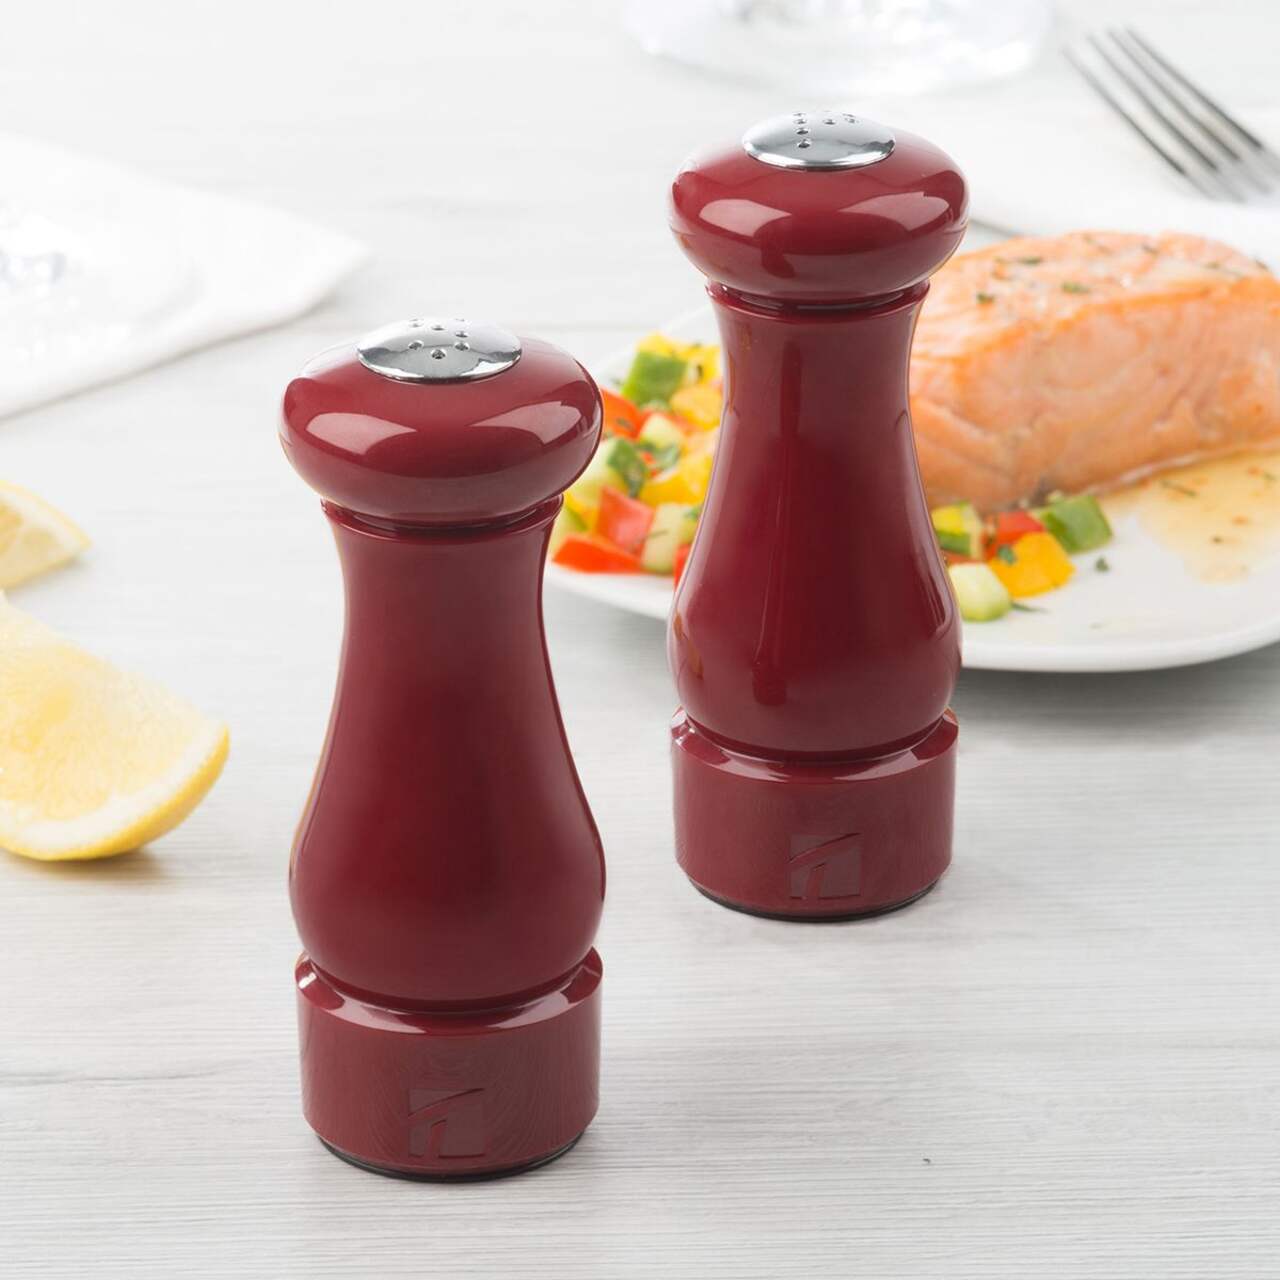 Pepper Shaker - Pepper Shaker Set Latest Price, Manufacturers & Suppliers